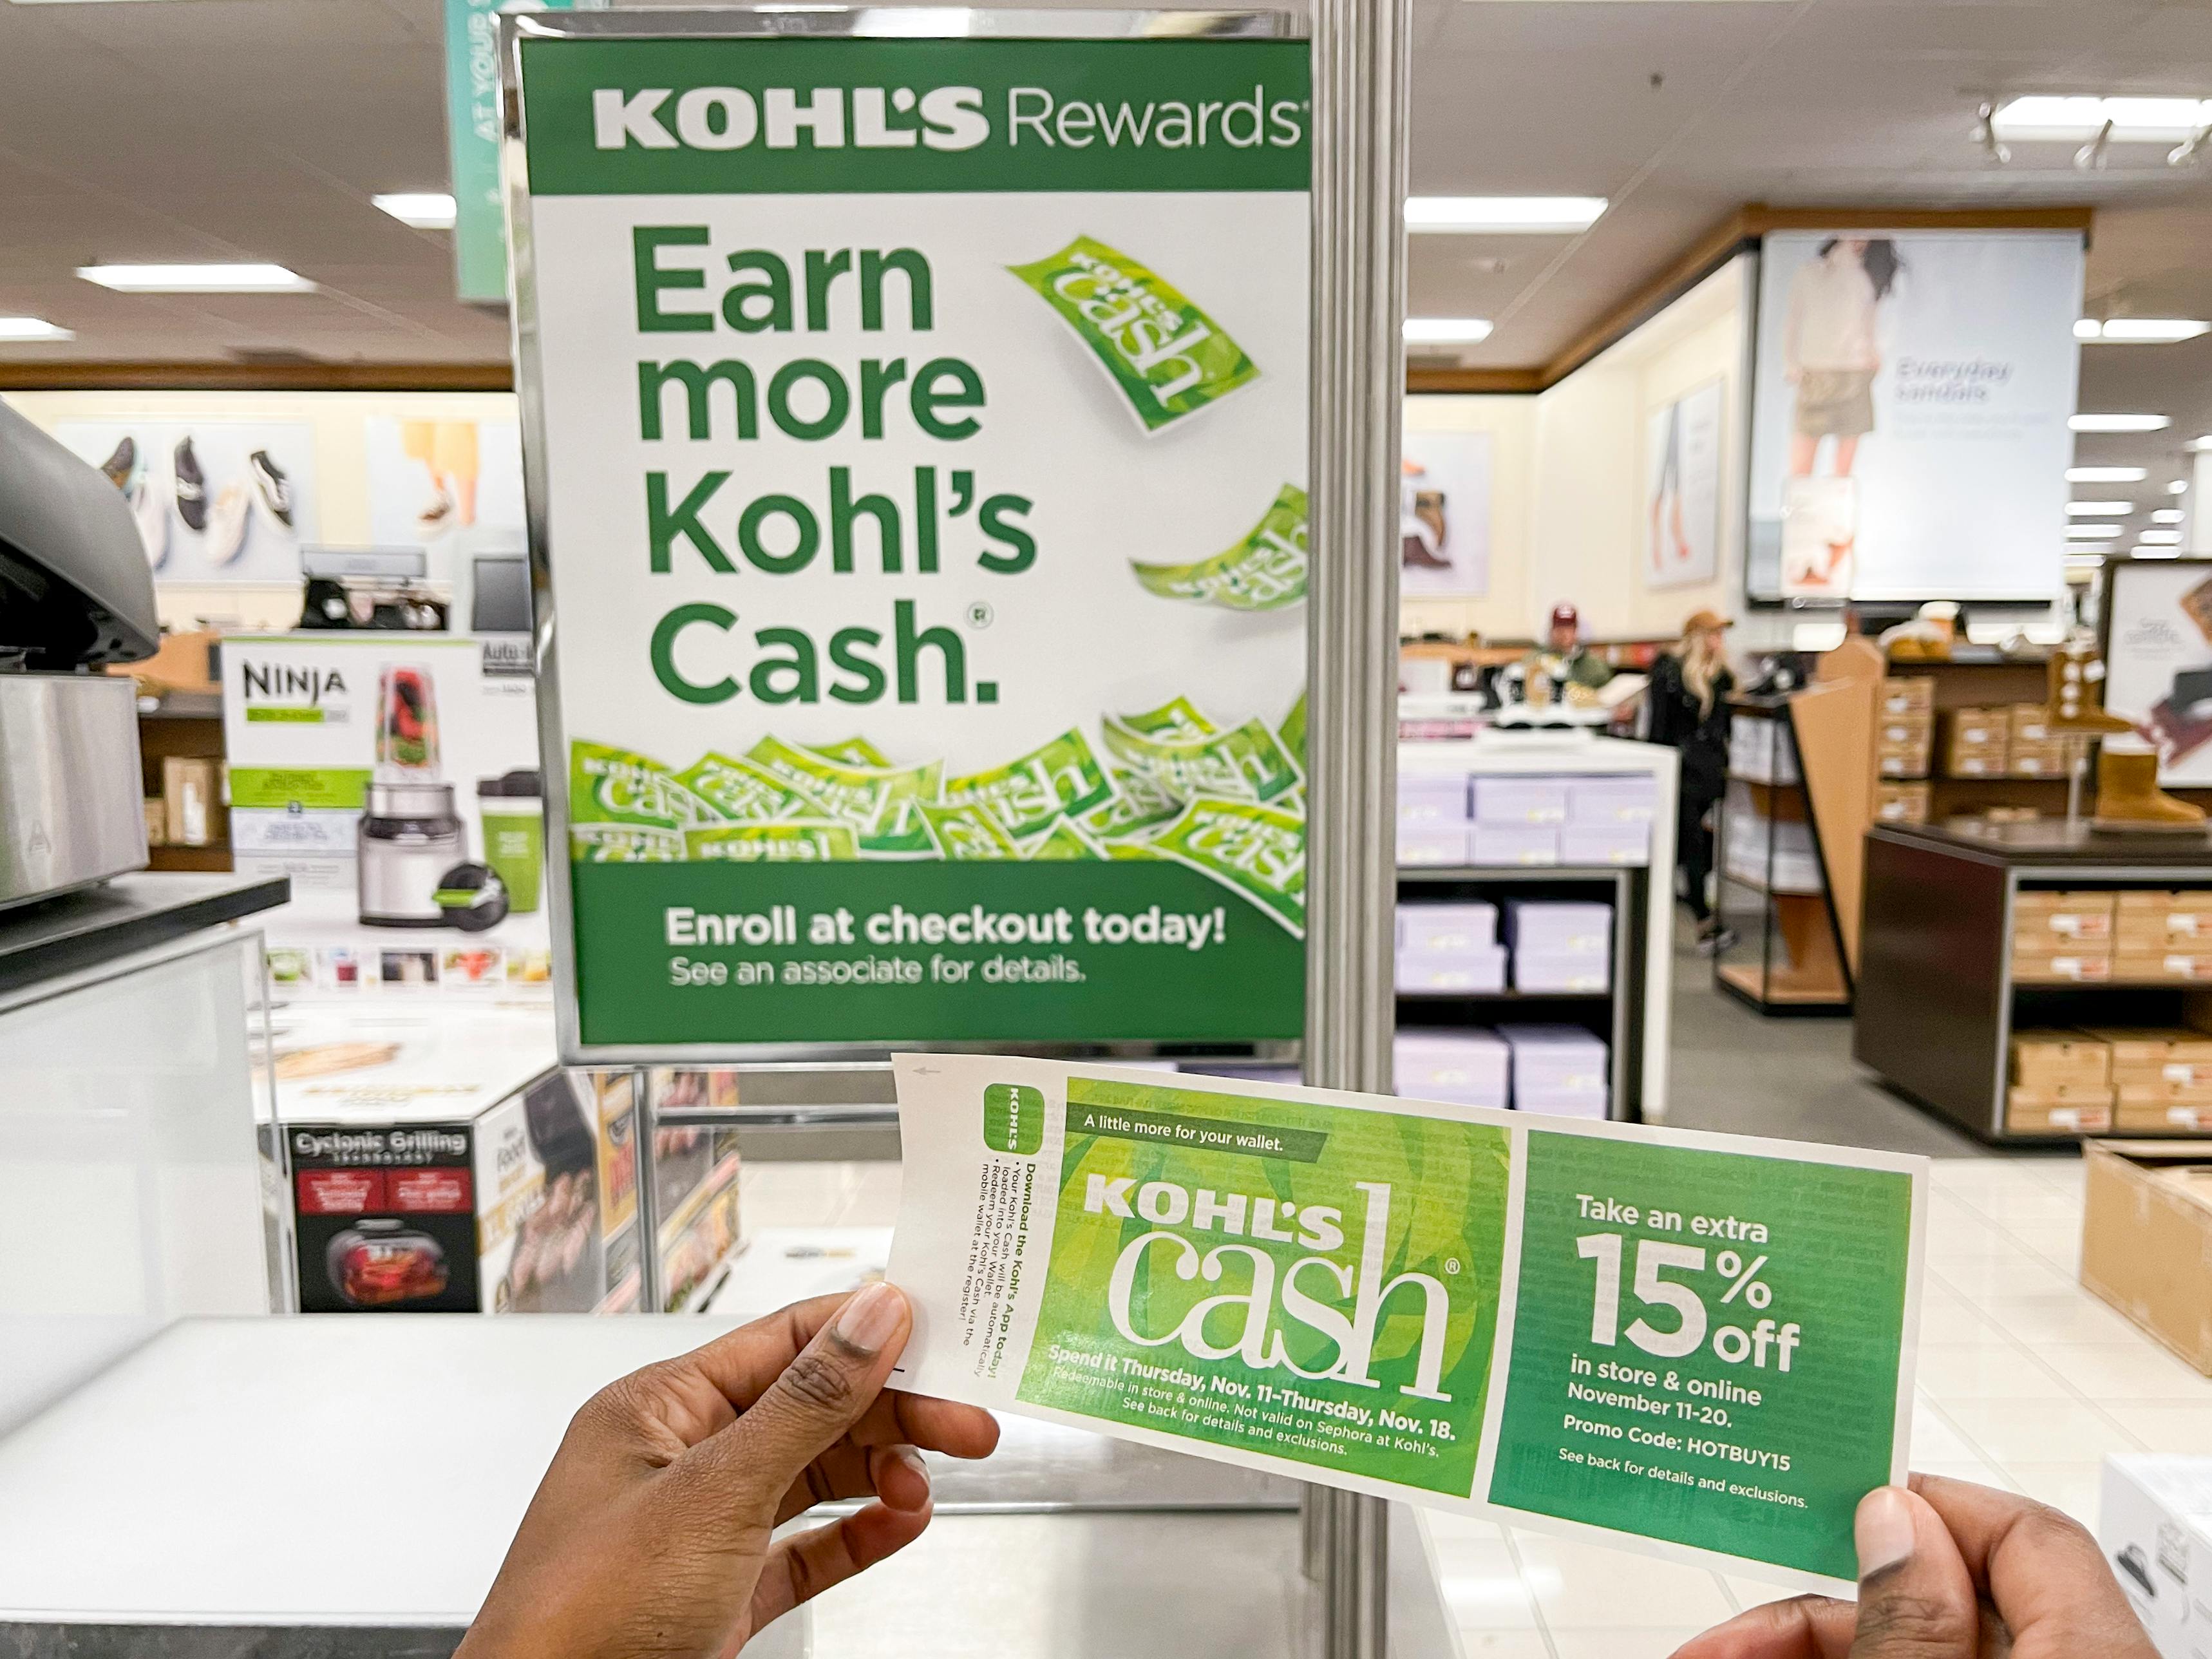 Kohls mystery coupon up to 40% with $10kohls cash for every $50 spent